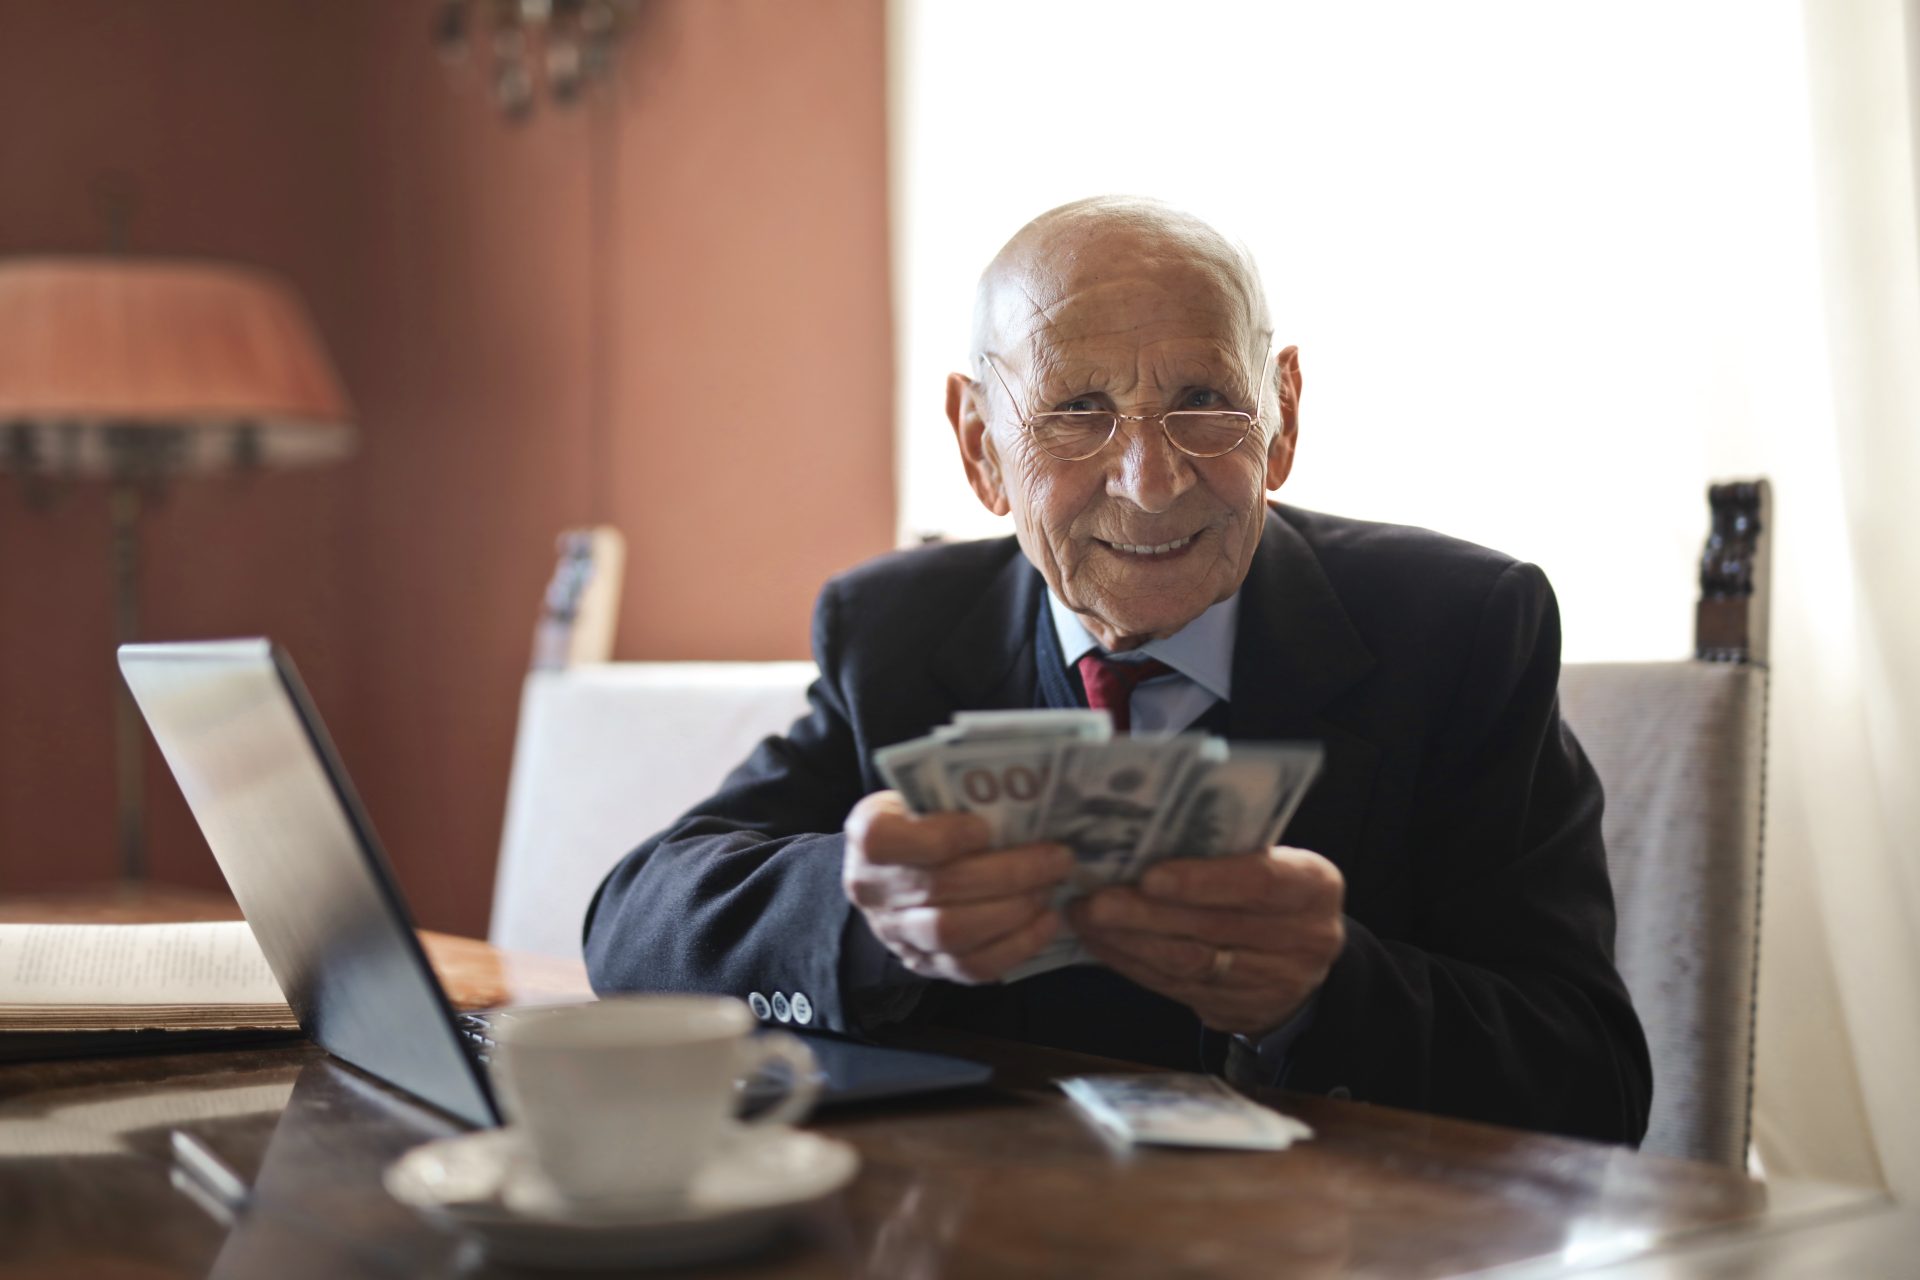 How to sell your business for retirement